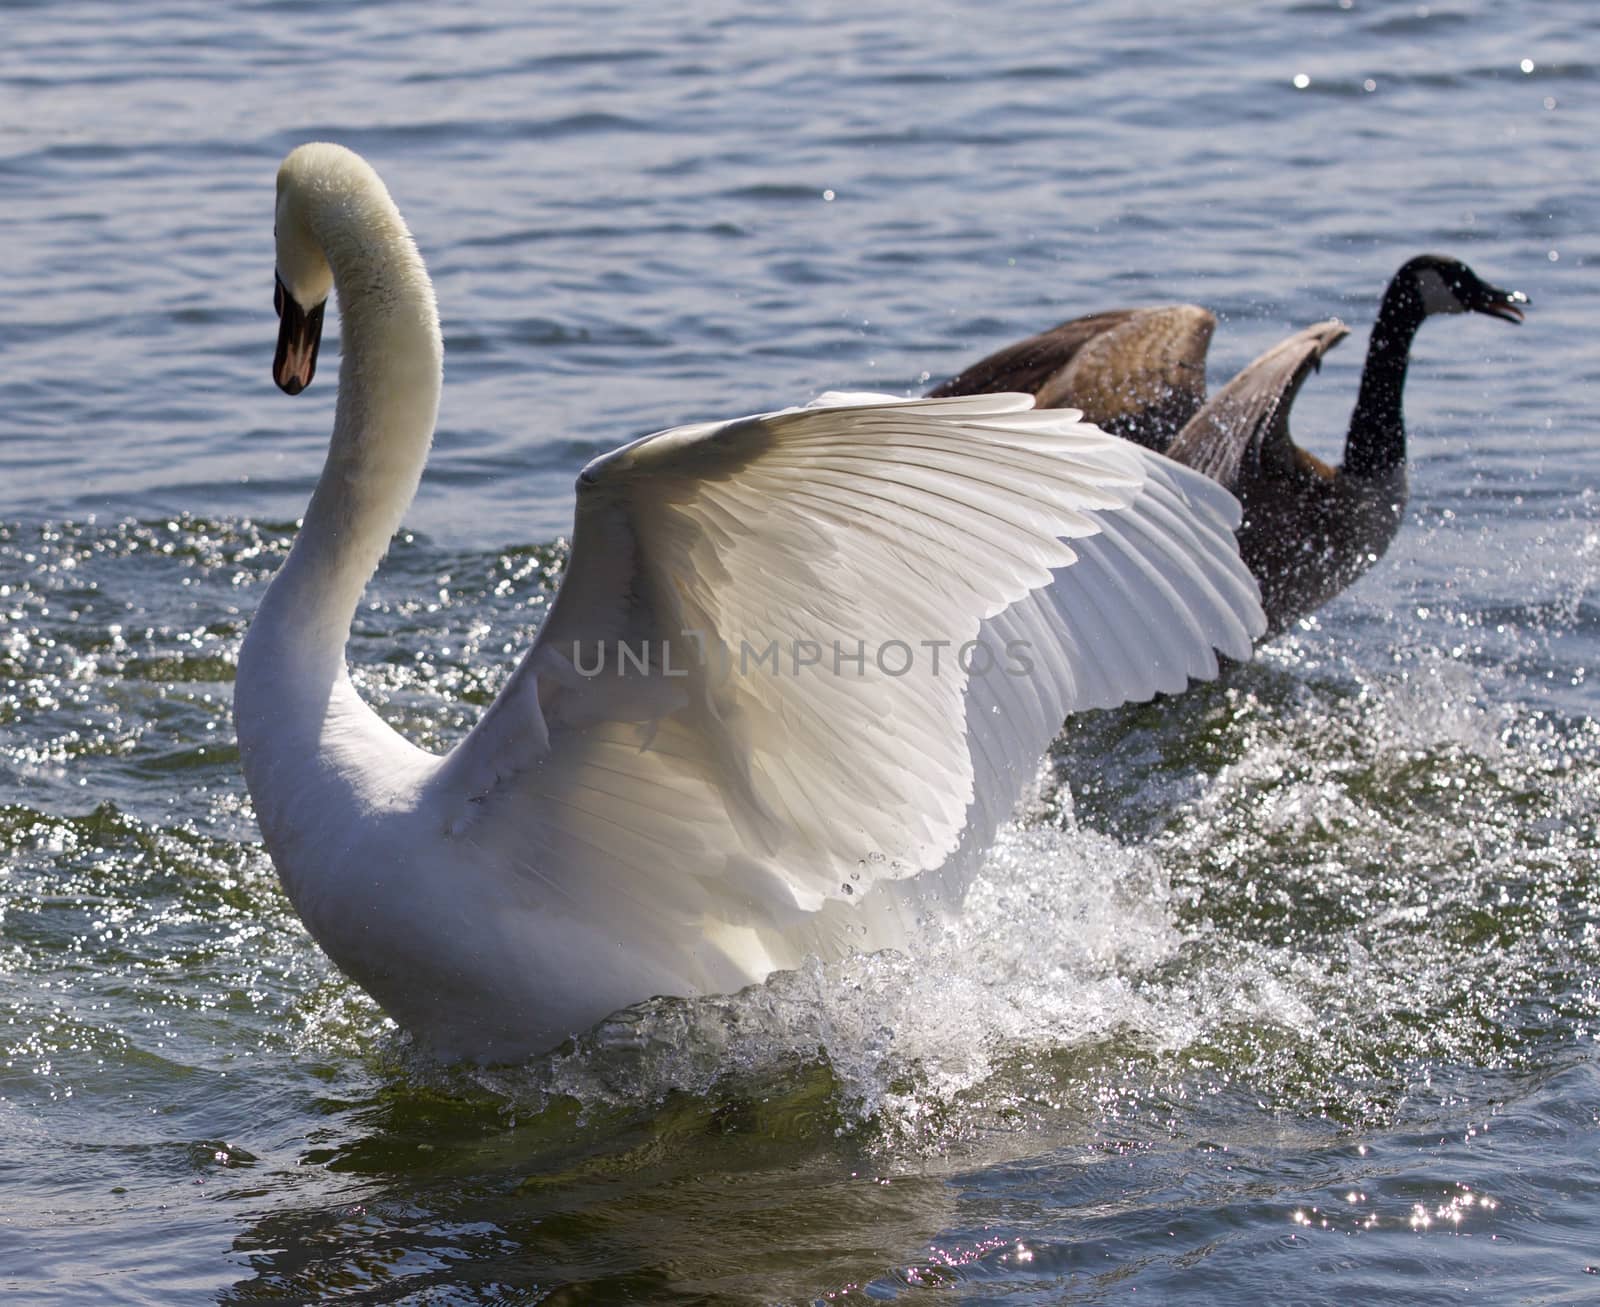 Fantastic contest between the powerful swan and the brave Canada goose